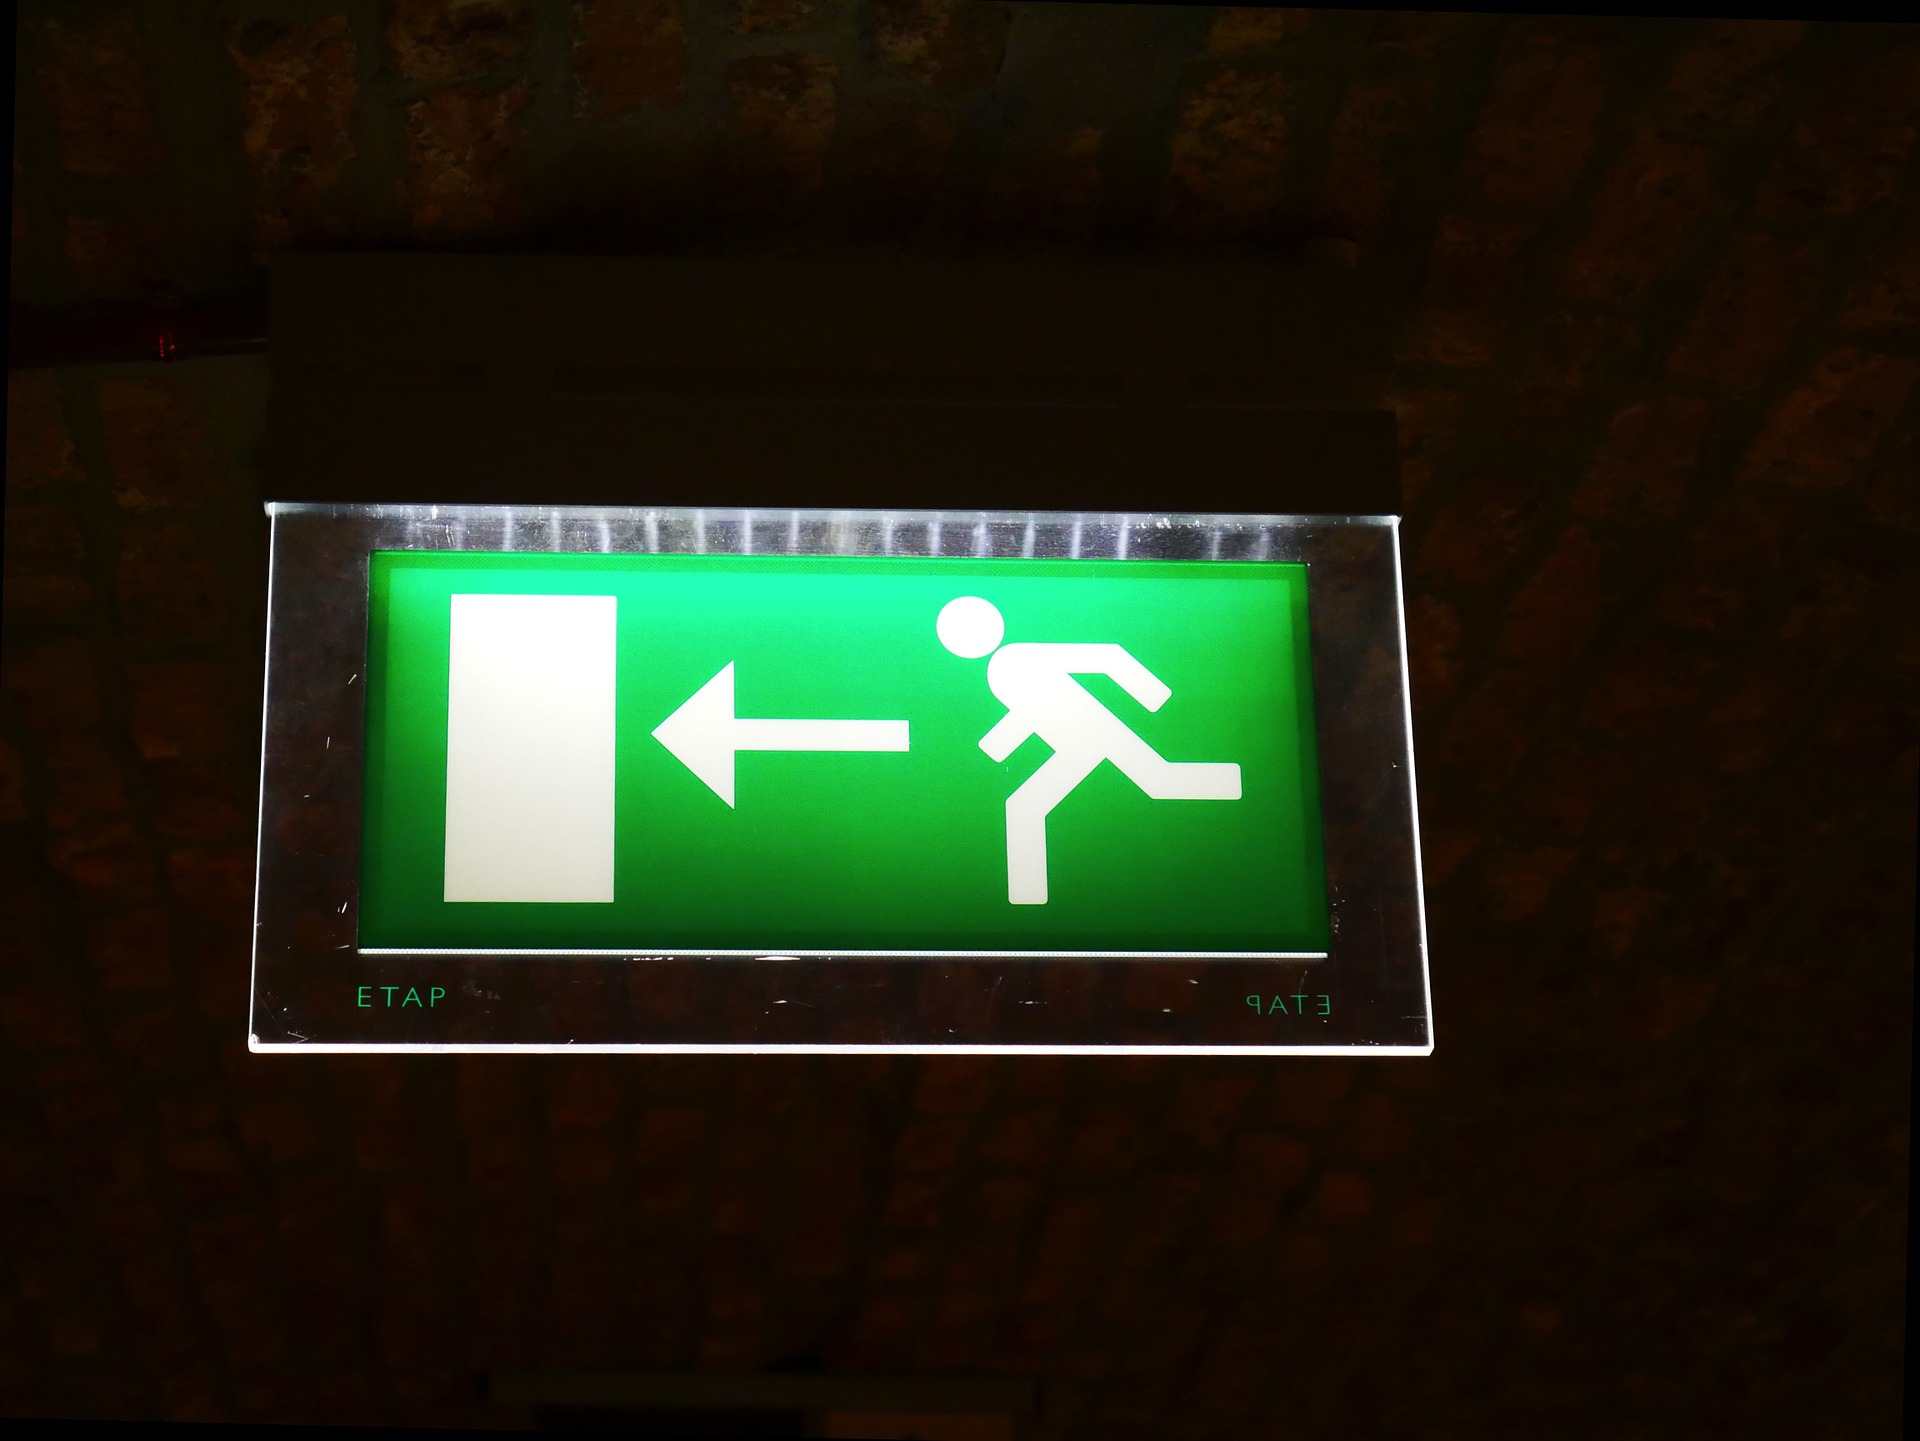 Exit Lighting And Emergency Lighting